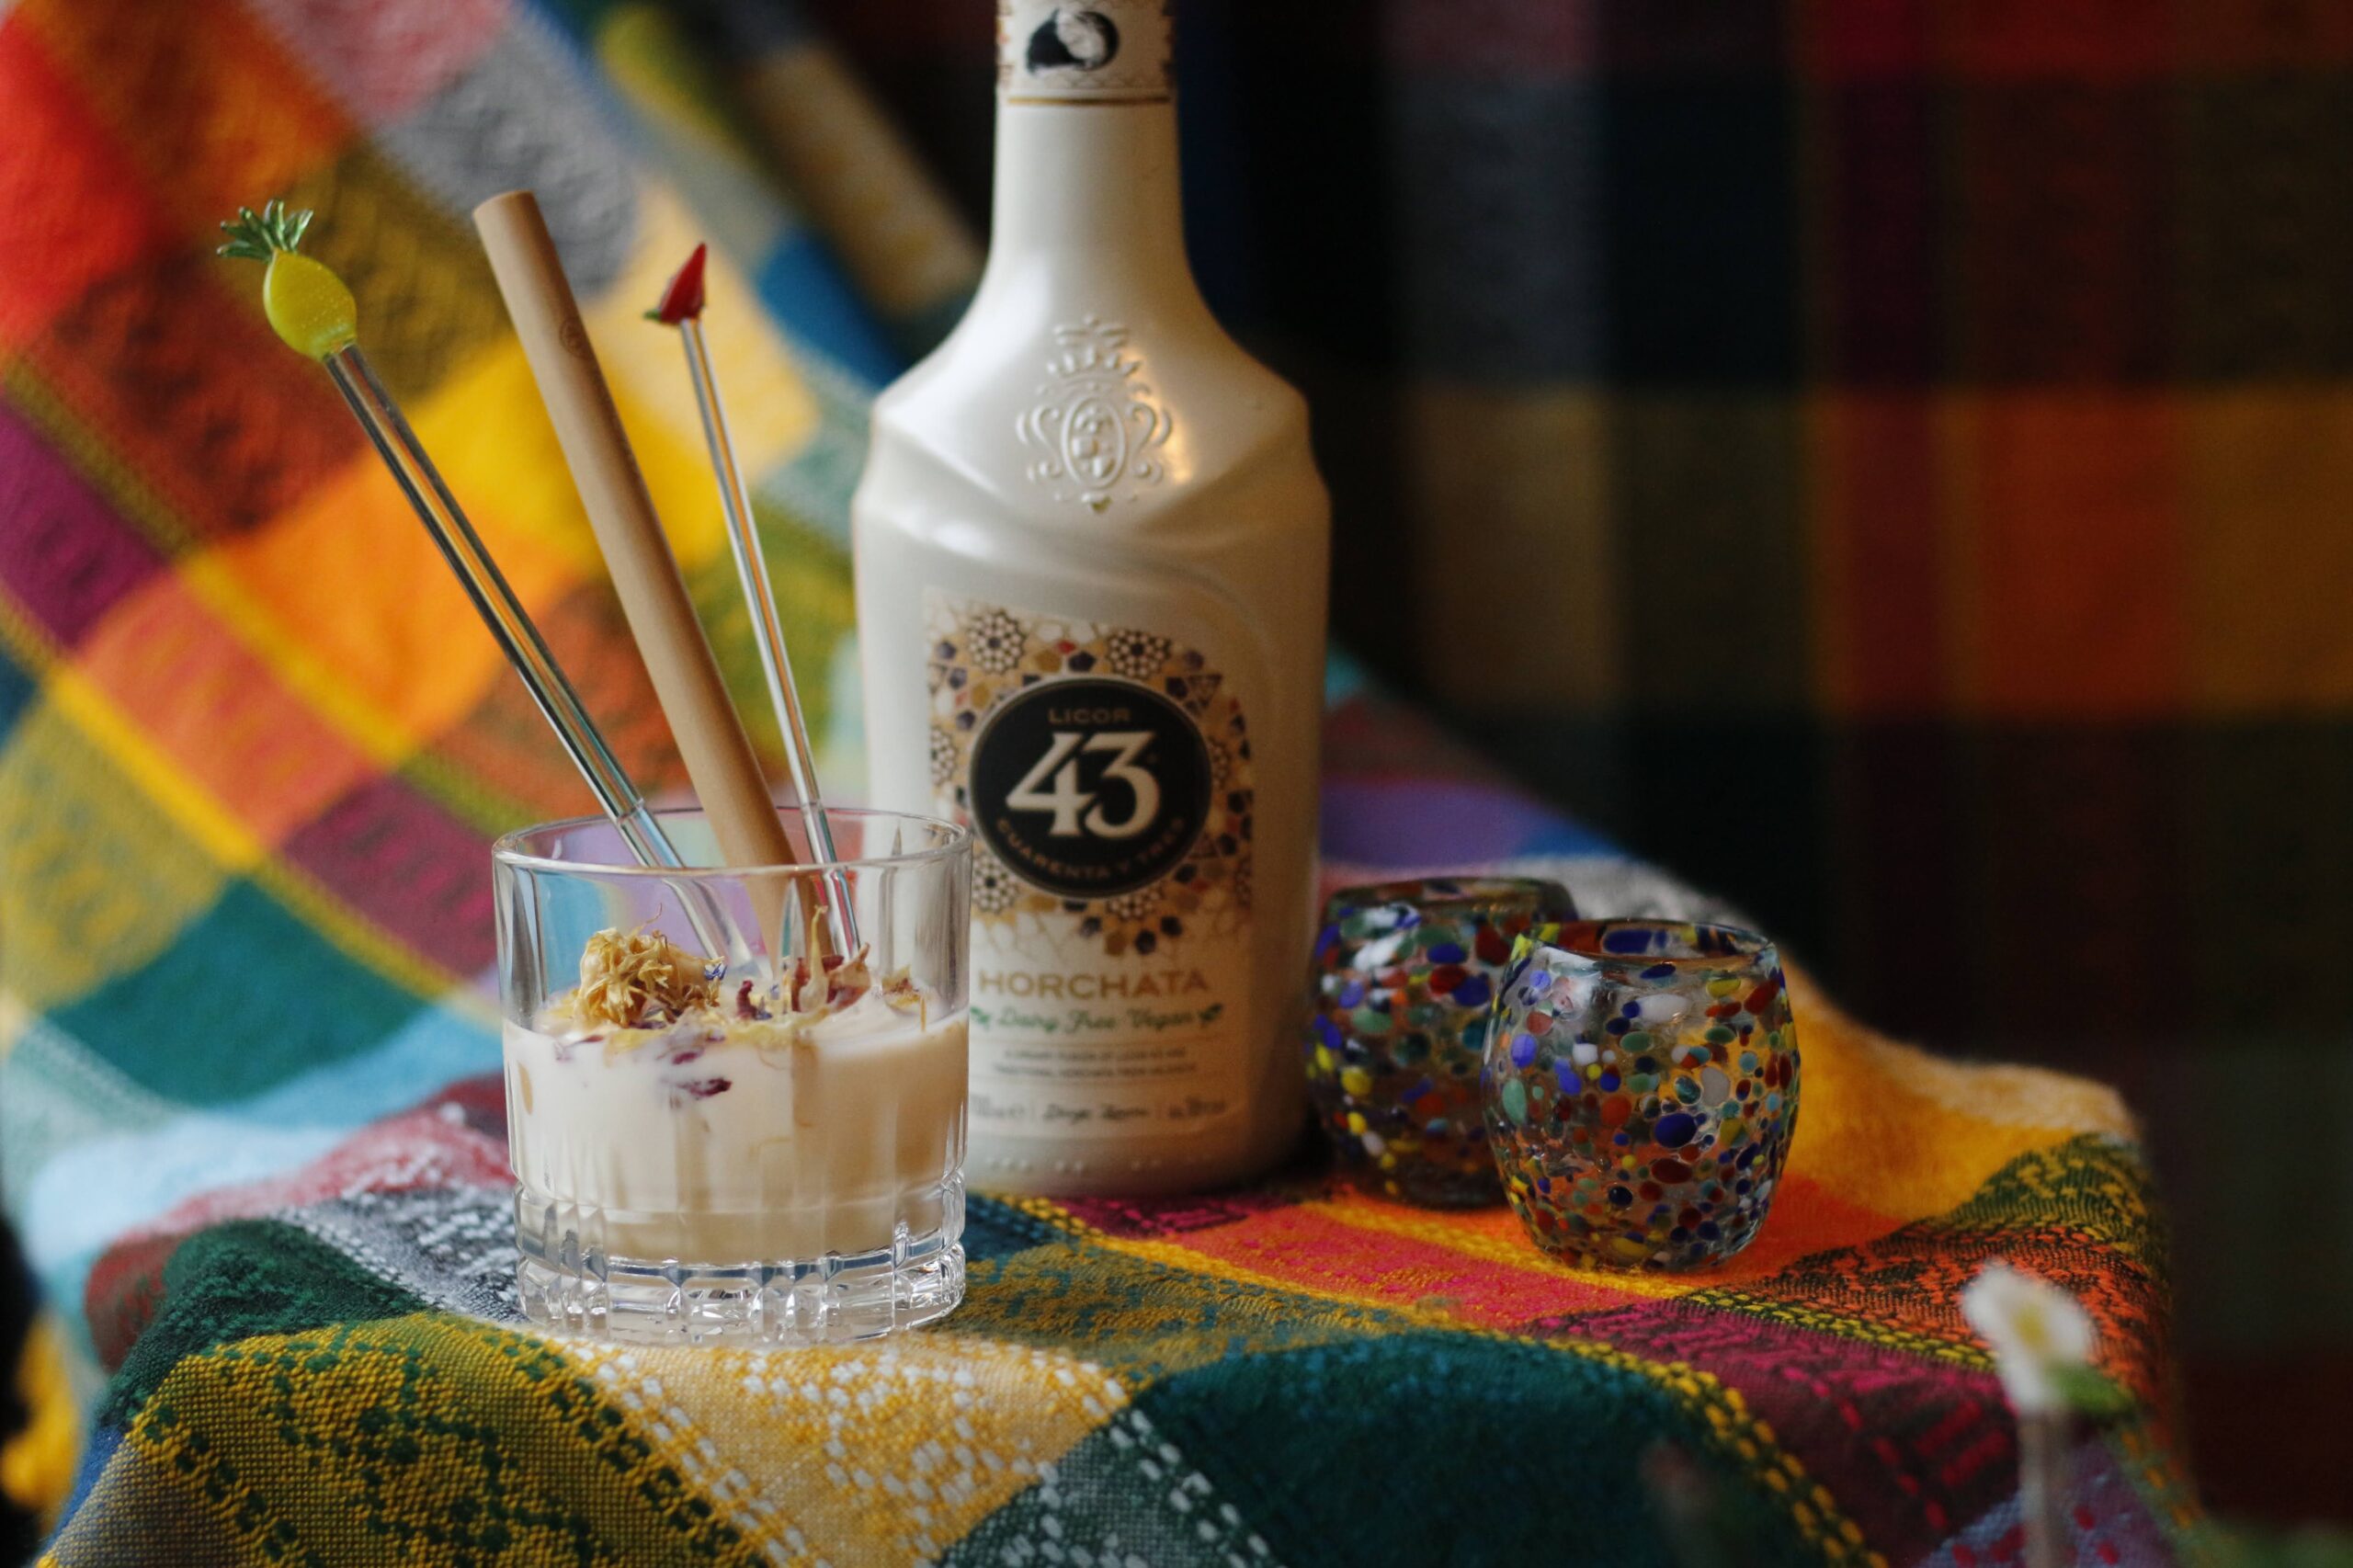 Review: Licor 43 Horchata - Drinkhacker